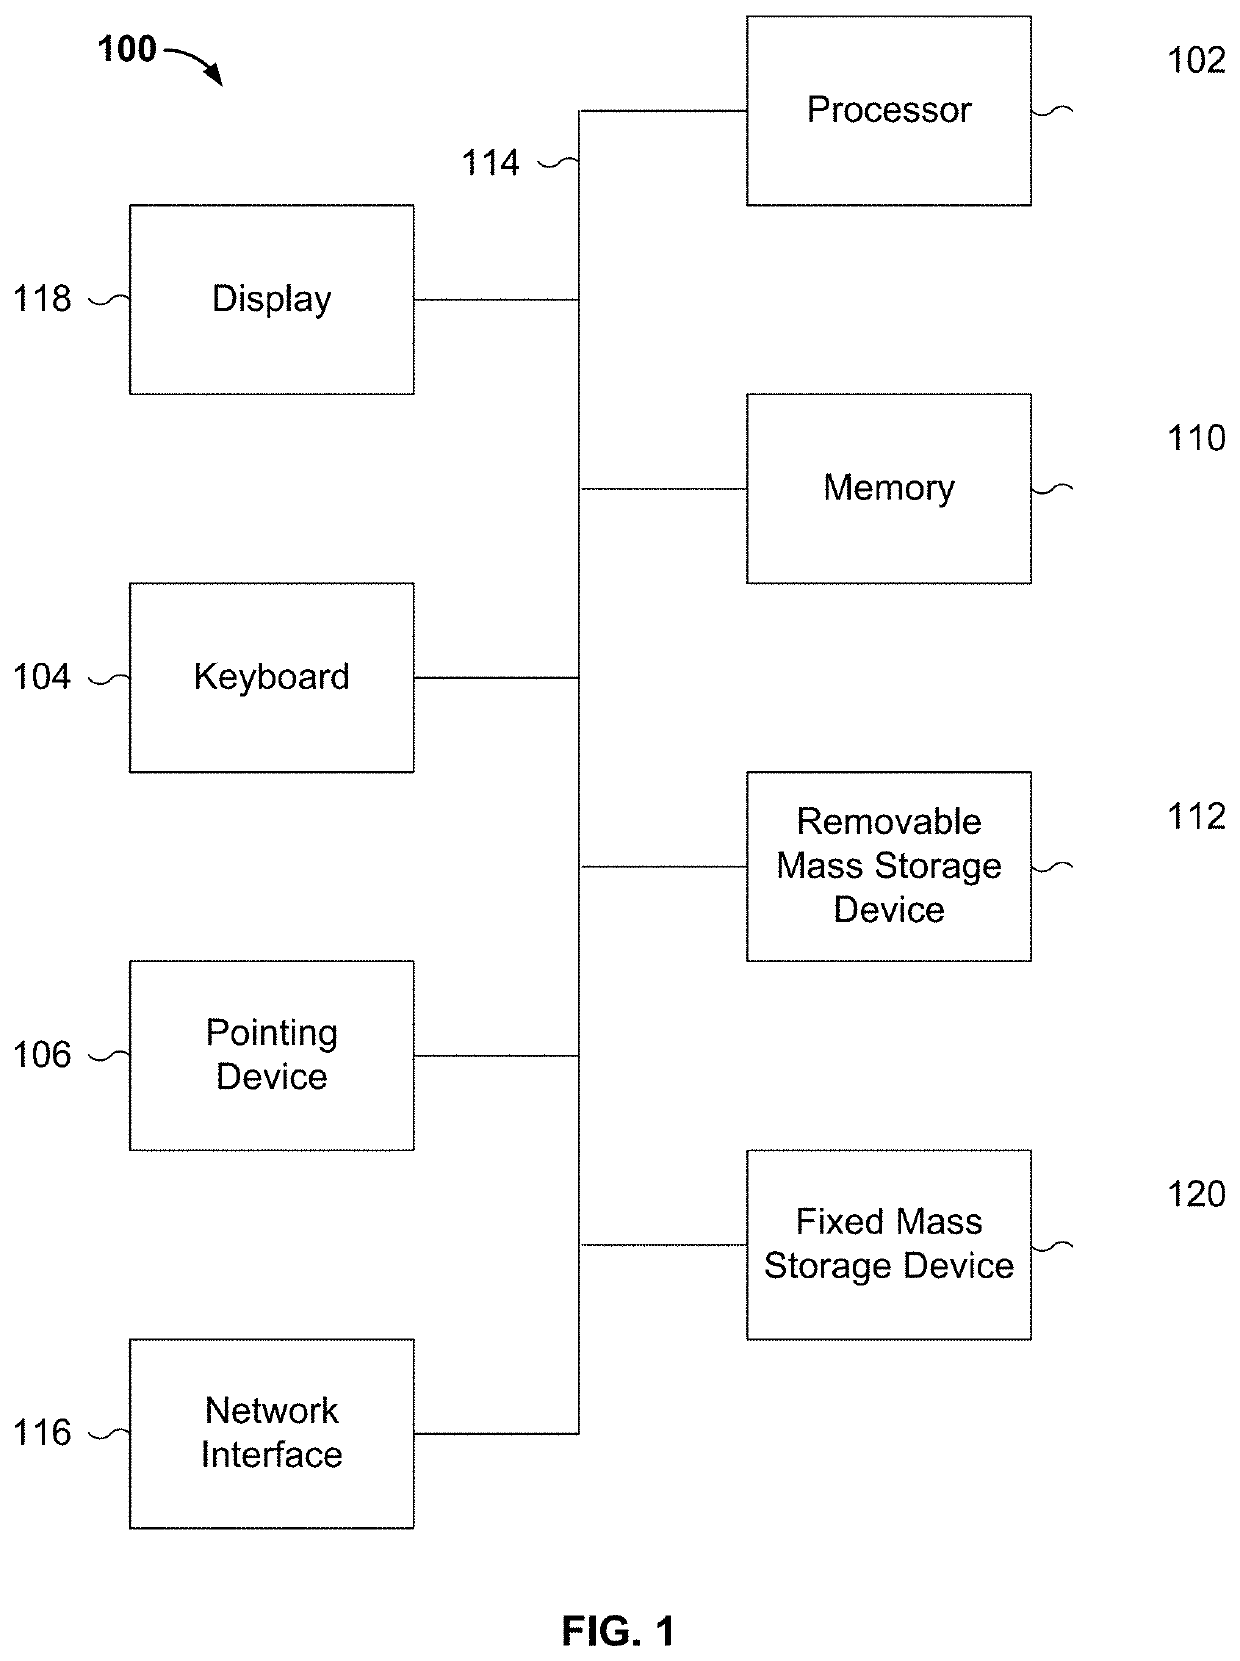 Method for analyzing and displaying genetic information between family members